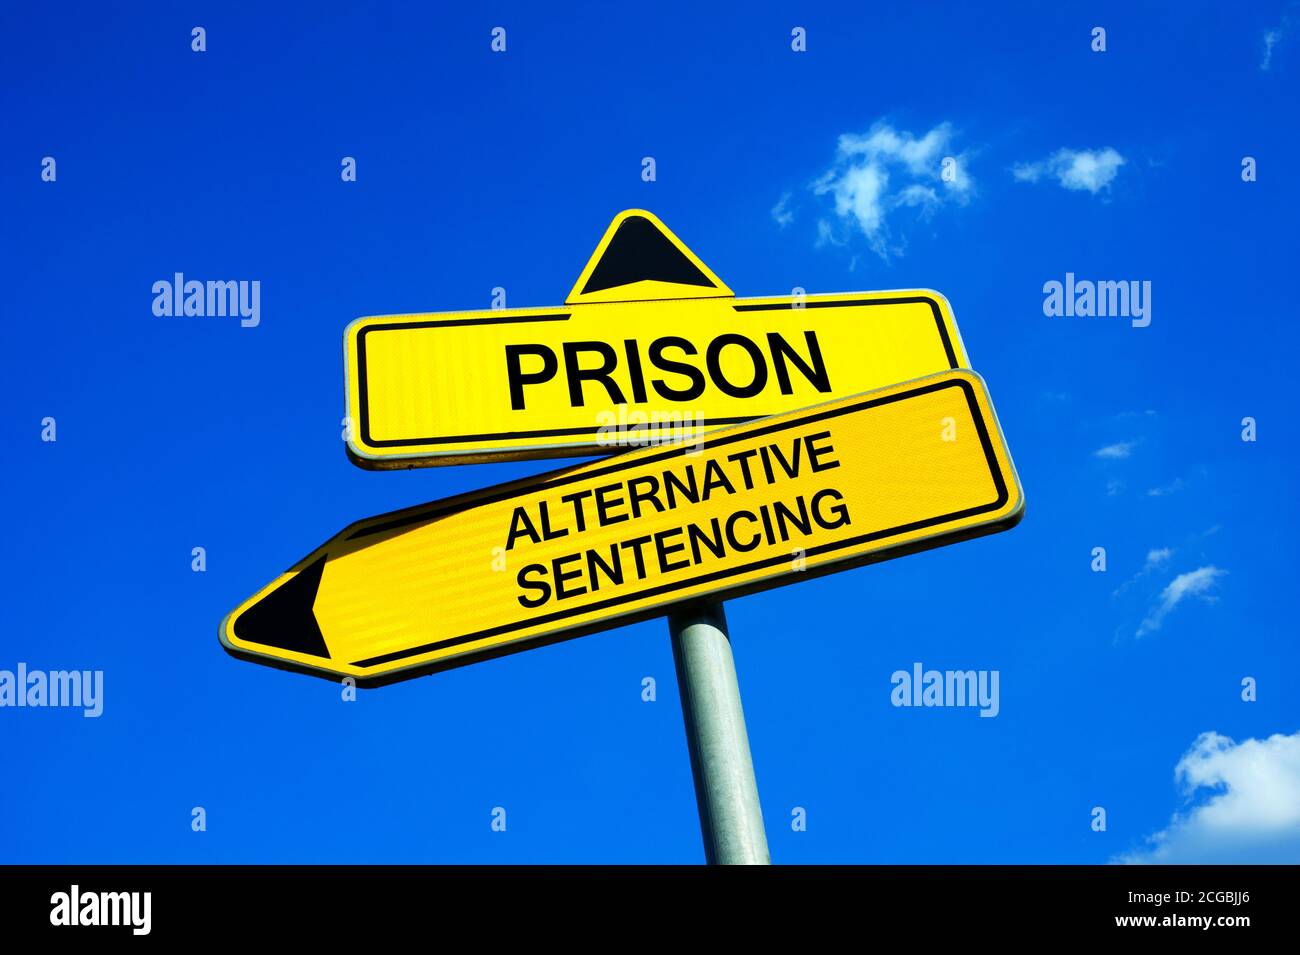 Prison or Alternative sentencing - Traffic sign with two options - Sentence as treatment or punishment. Effort to rehabilitate criminal and defendant. Stock Photo